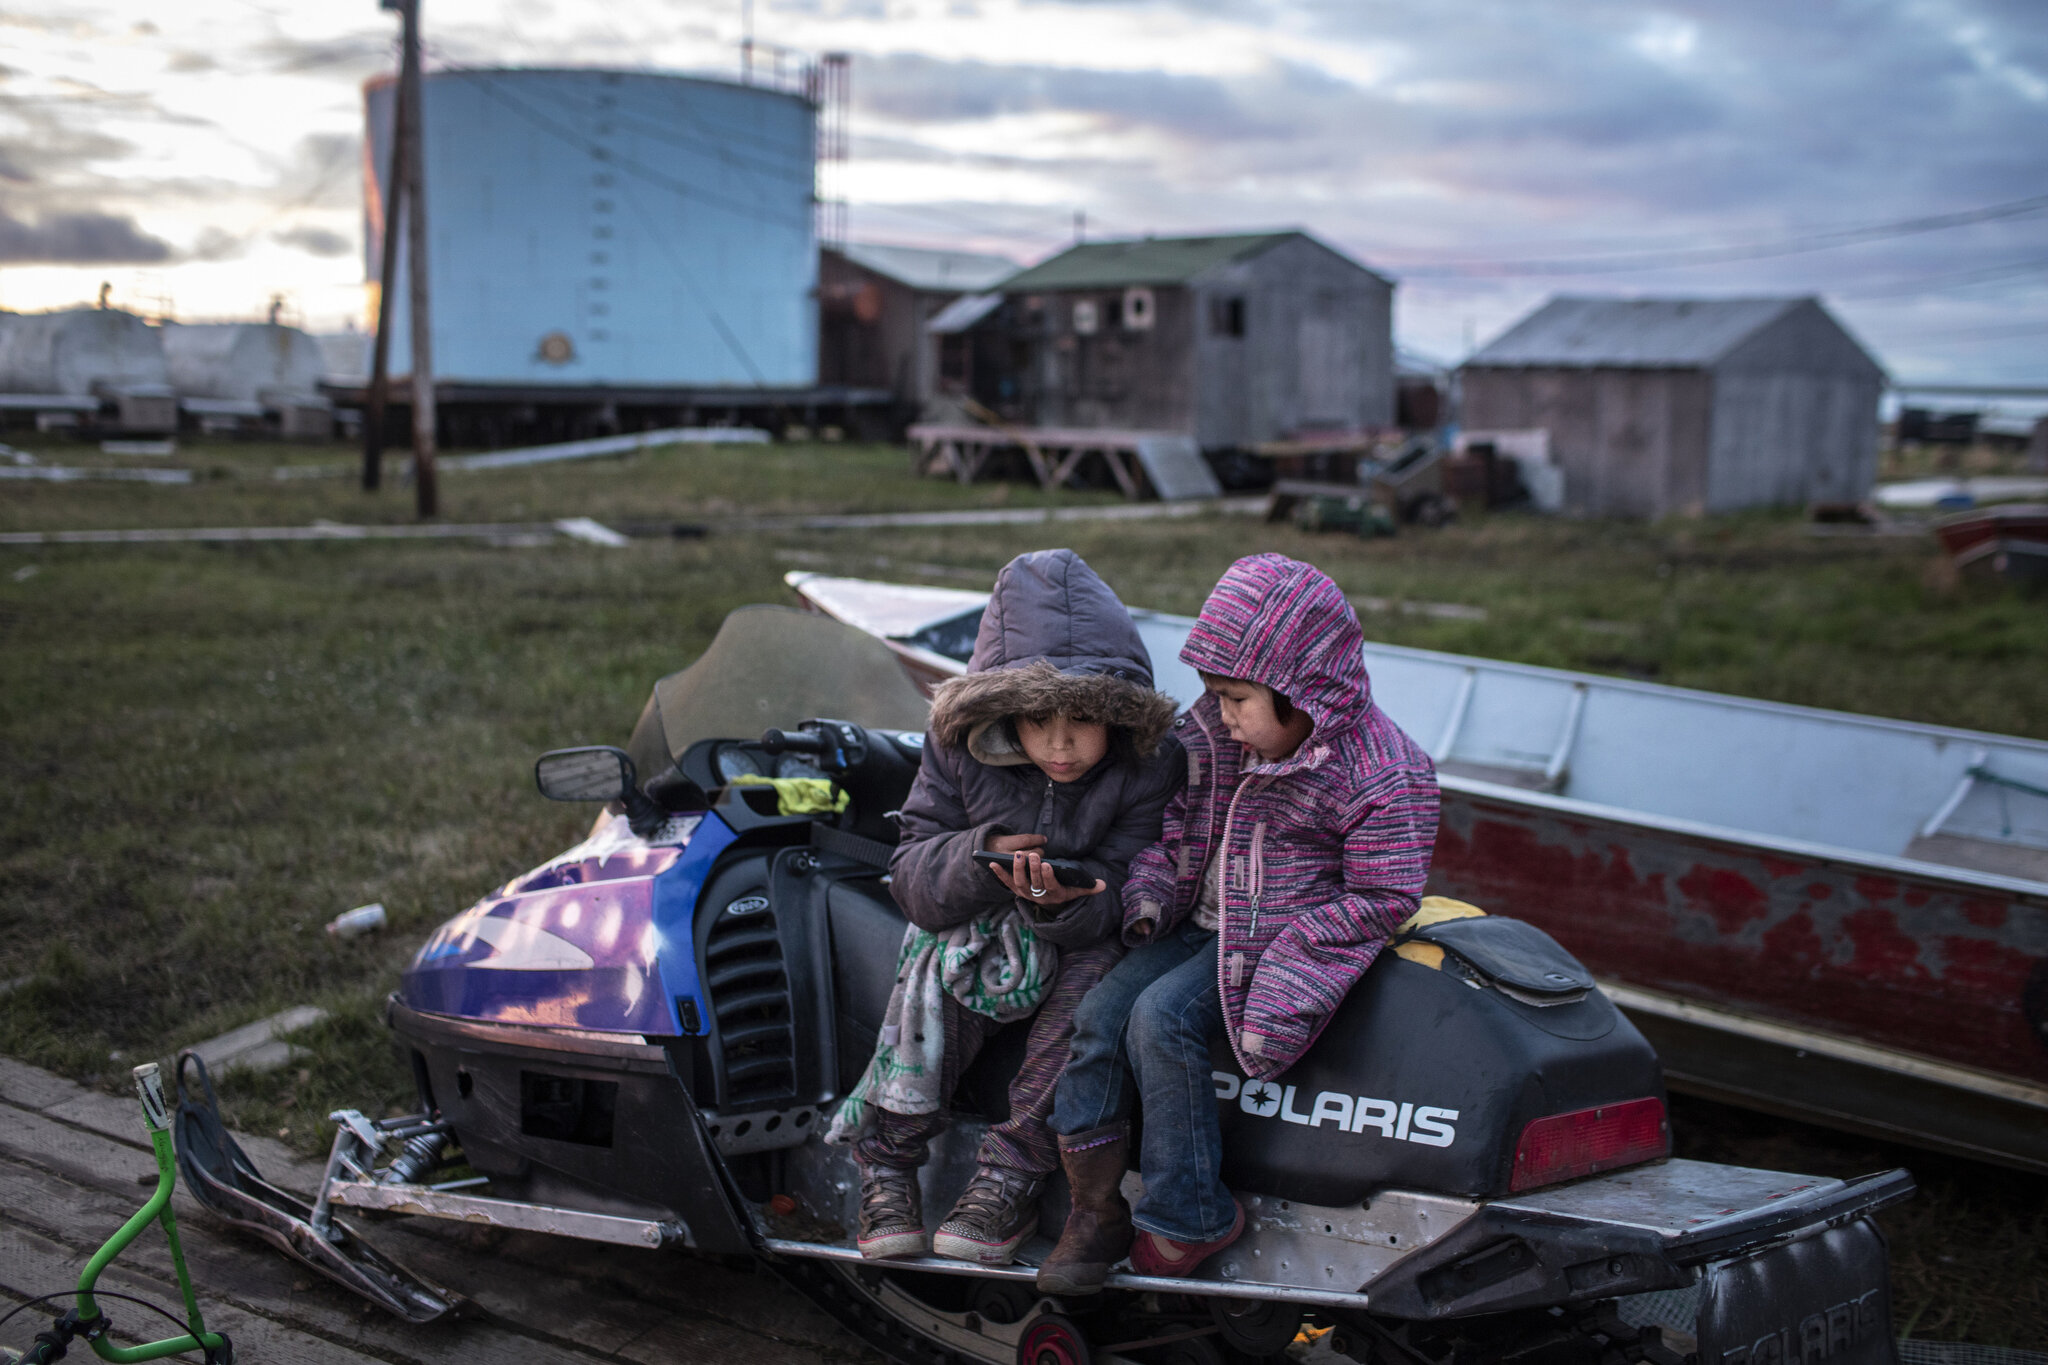  Two young girls play on a family member's phone while sitting on a broken down snowmobile in Newtok, Alaska. Smart phones are ubiquitous in the village. June 2, 2019.The Yupik village of Newtok, Alaska, population 380, is sinking as the permafrost b